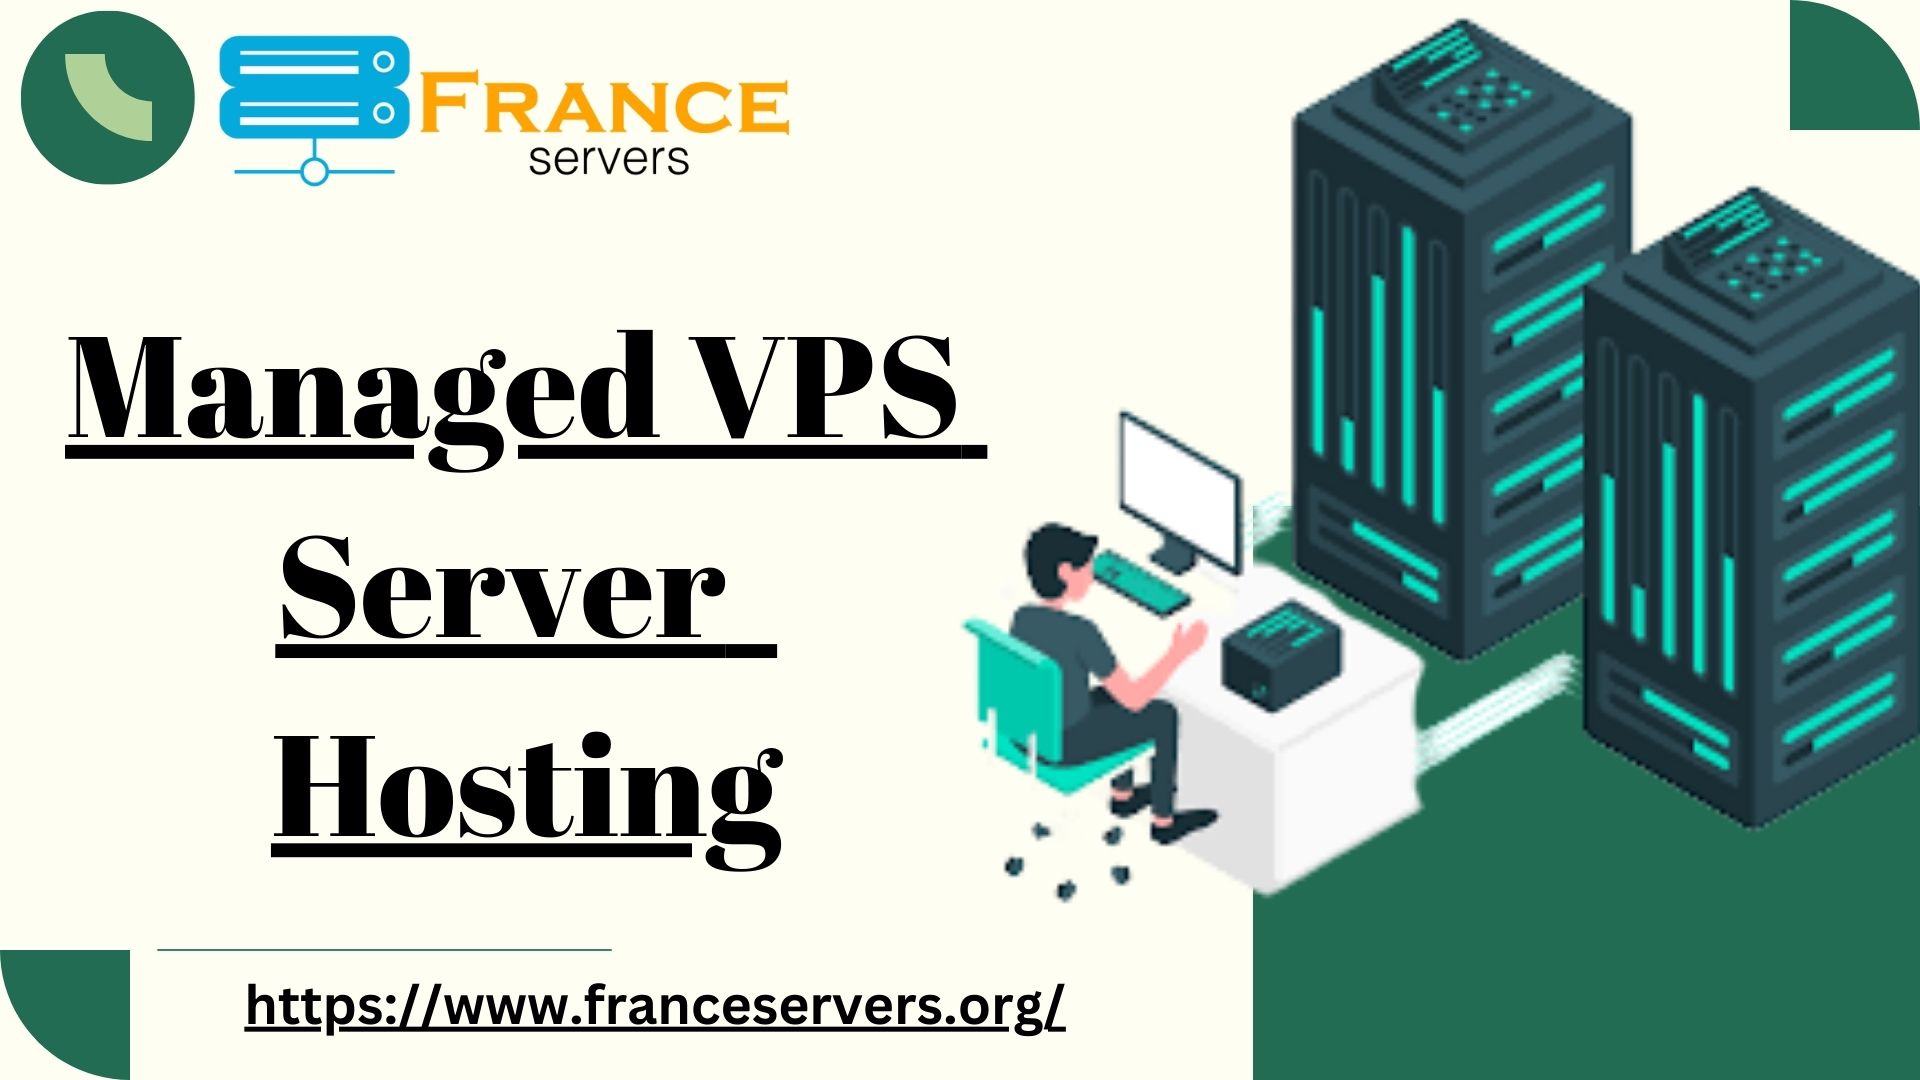 ! This blog post is designed to help you understand what a Managed VPS Server Hosting is, its benefits, and how you can purchase one with ease. Let's dive in!